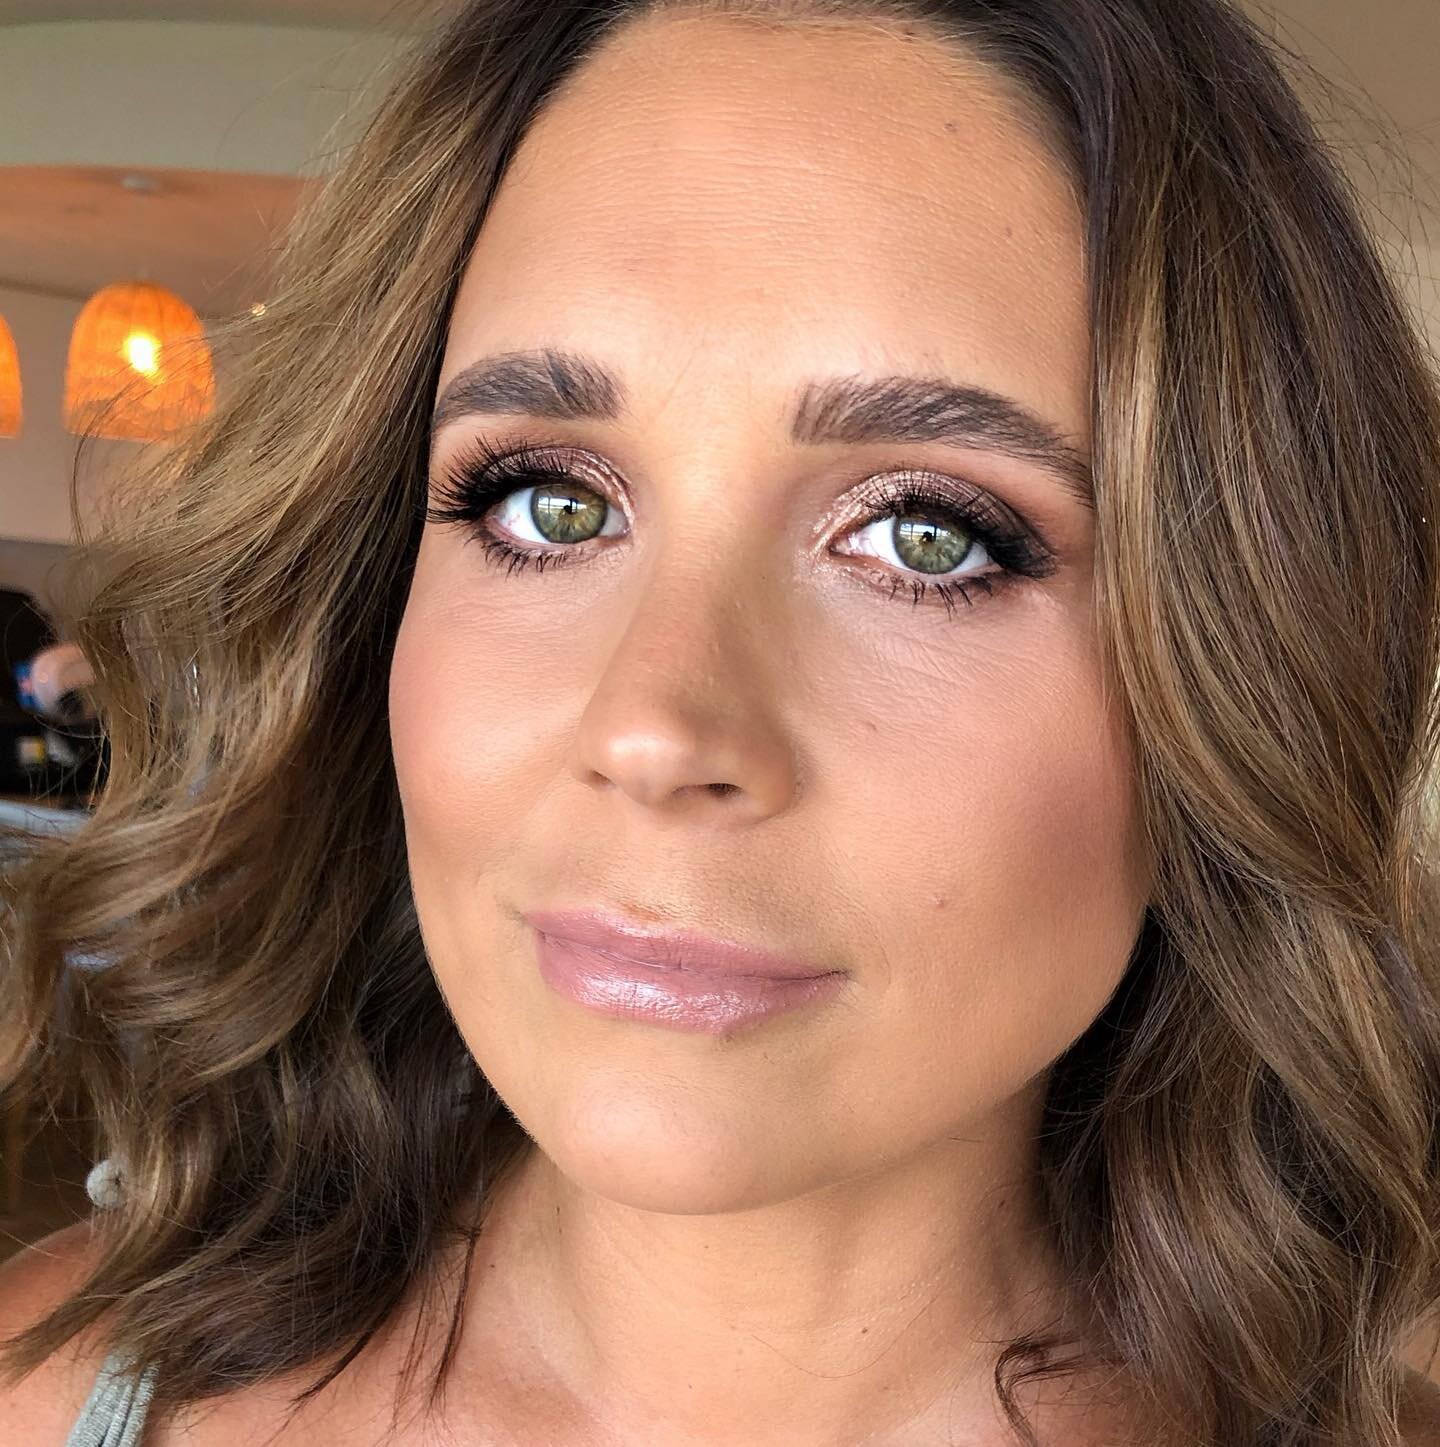 Being MIA for a while from the insta&hellip; well sometimes a girl jus needs a break from the social media and live the real life 😁
&bull;
I am back with my bronzed smokey with a lil extra touch of shimmer on this gorgeous mumma 
&bull;
Love the @ys